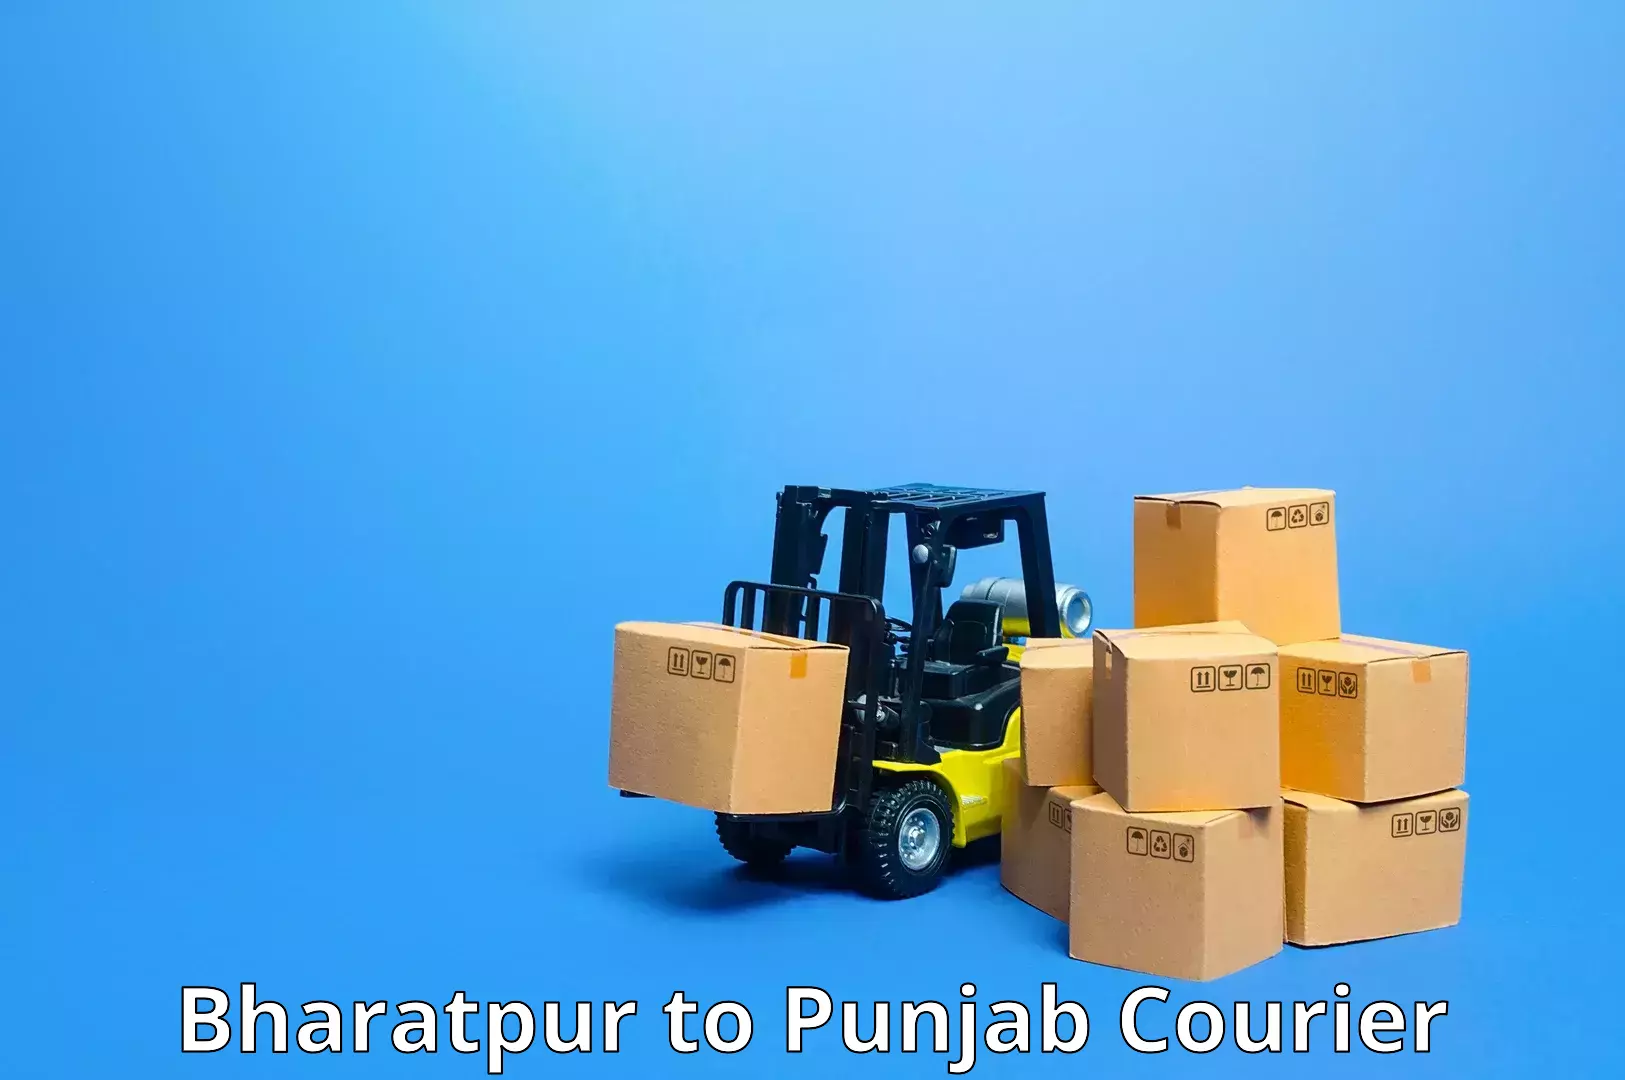 Global logistics network Bharatpur to Sultanpur Lodhi